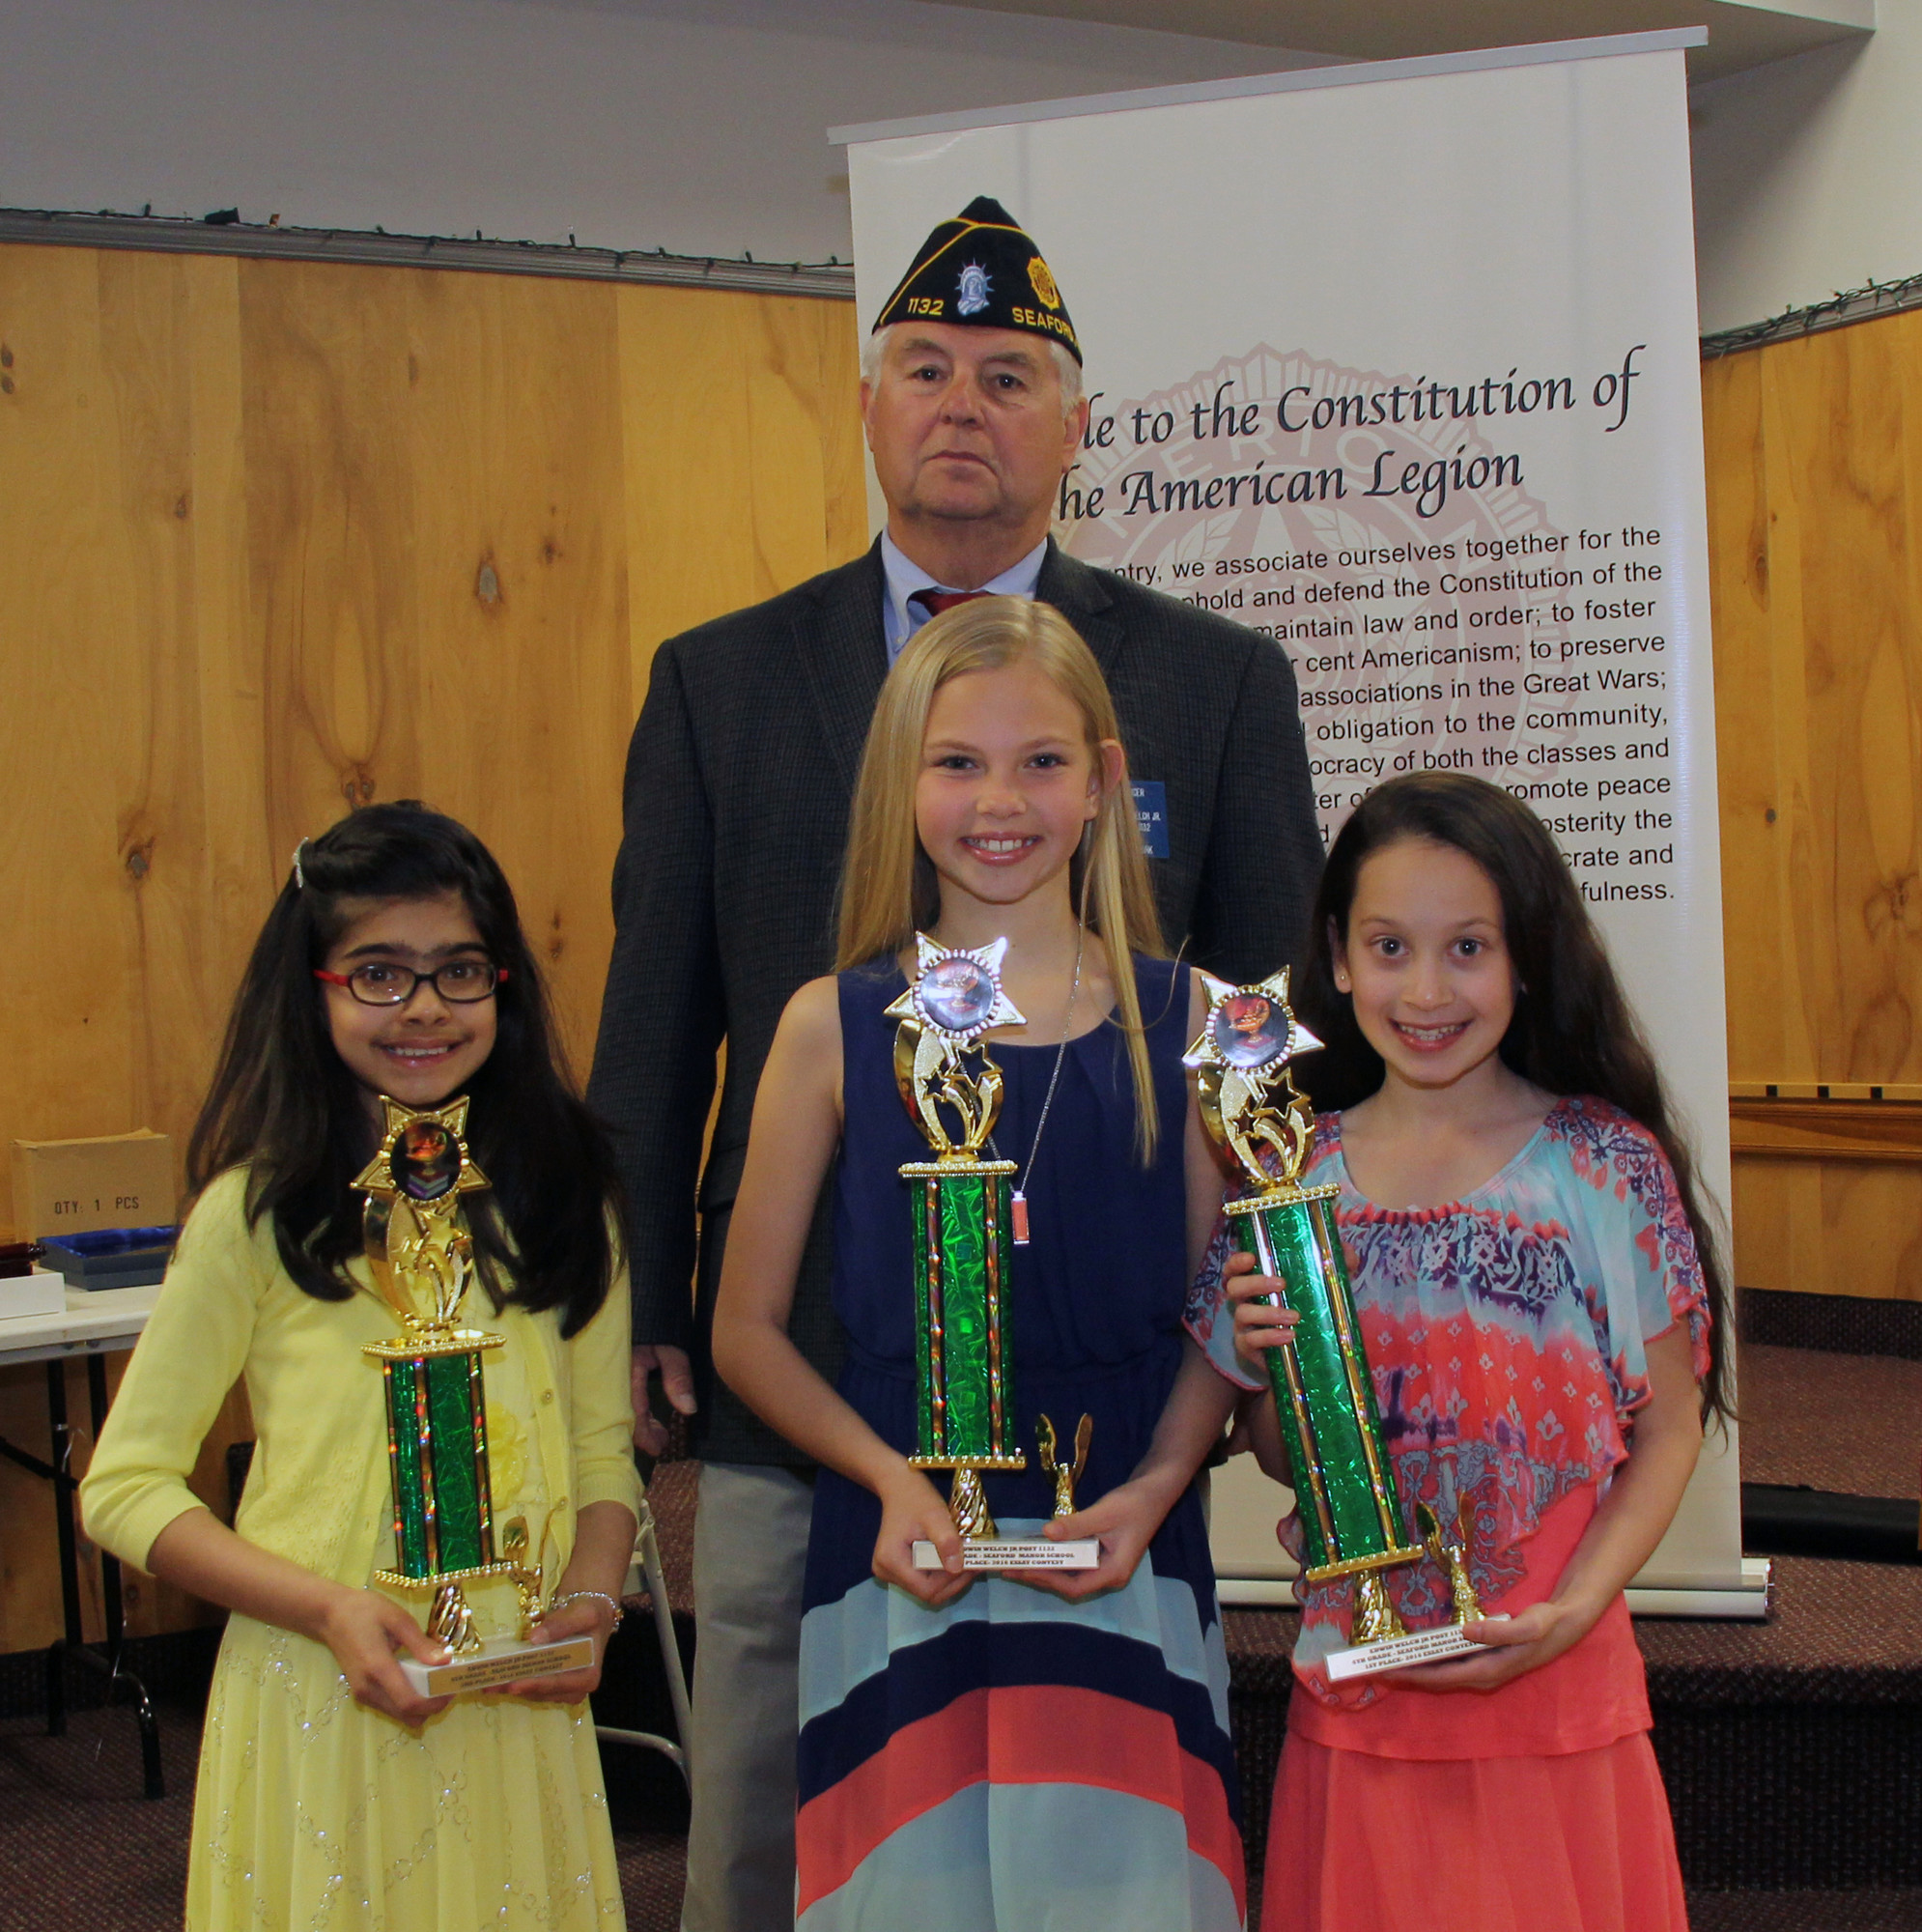 Legionnaire Bill Hoehn with the Seaford Manor School fourth-grade winners of the Seaford American Legion Essay Contest 1st Place Dylan Wong, 2nd Place Katherine Hoehn and 3rd Place Umika Hathiramani.